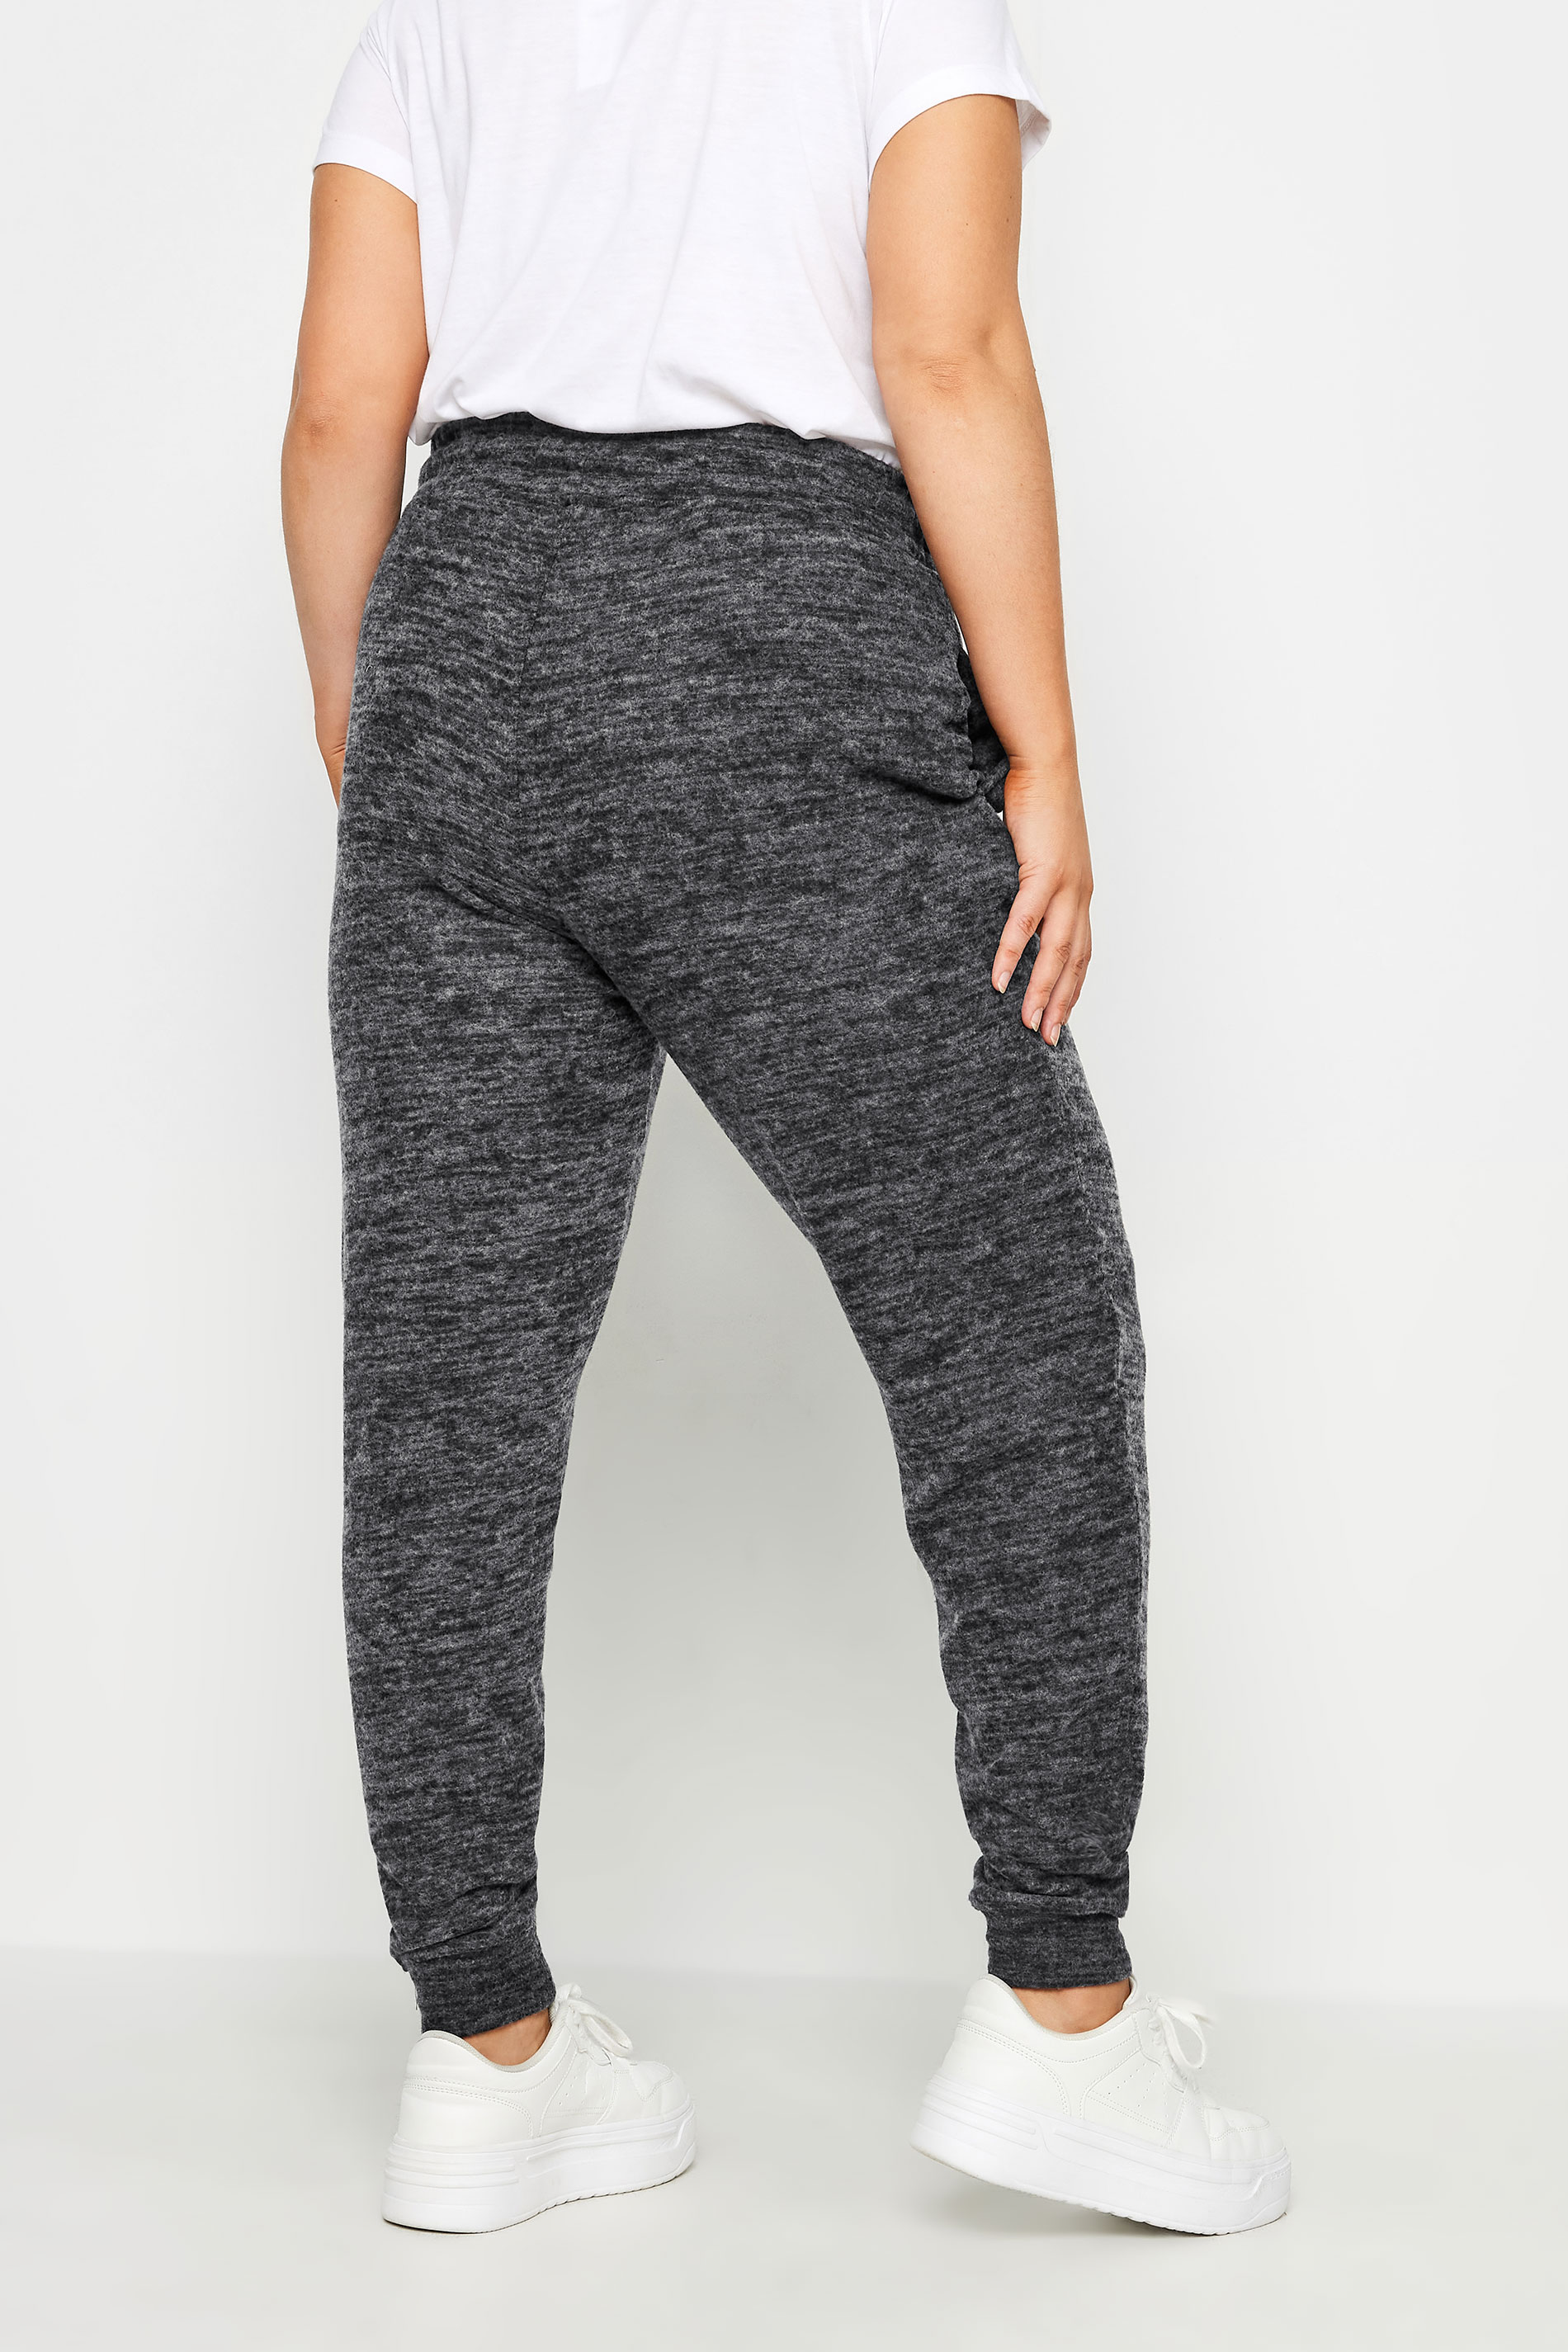 YOURS Plus Size Charcoal Grey Marl Soft Touch Cuffed Joggers | Yours Clothing 3